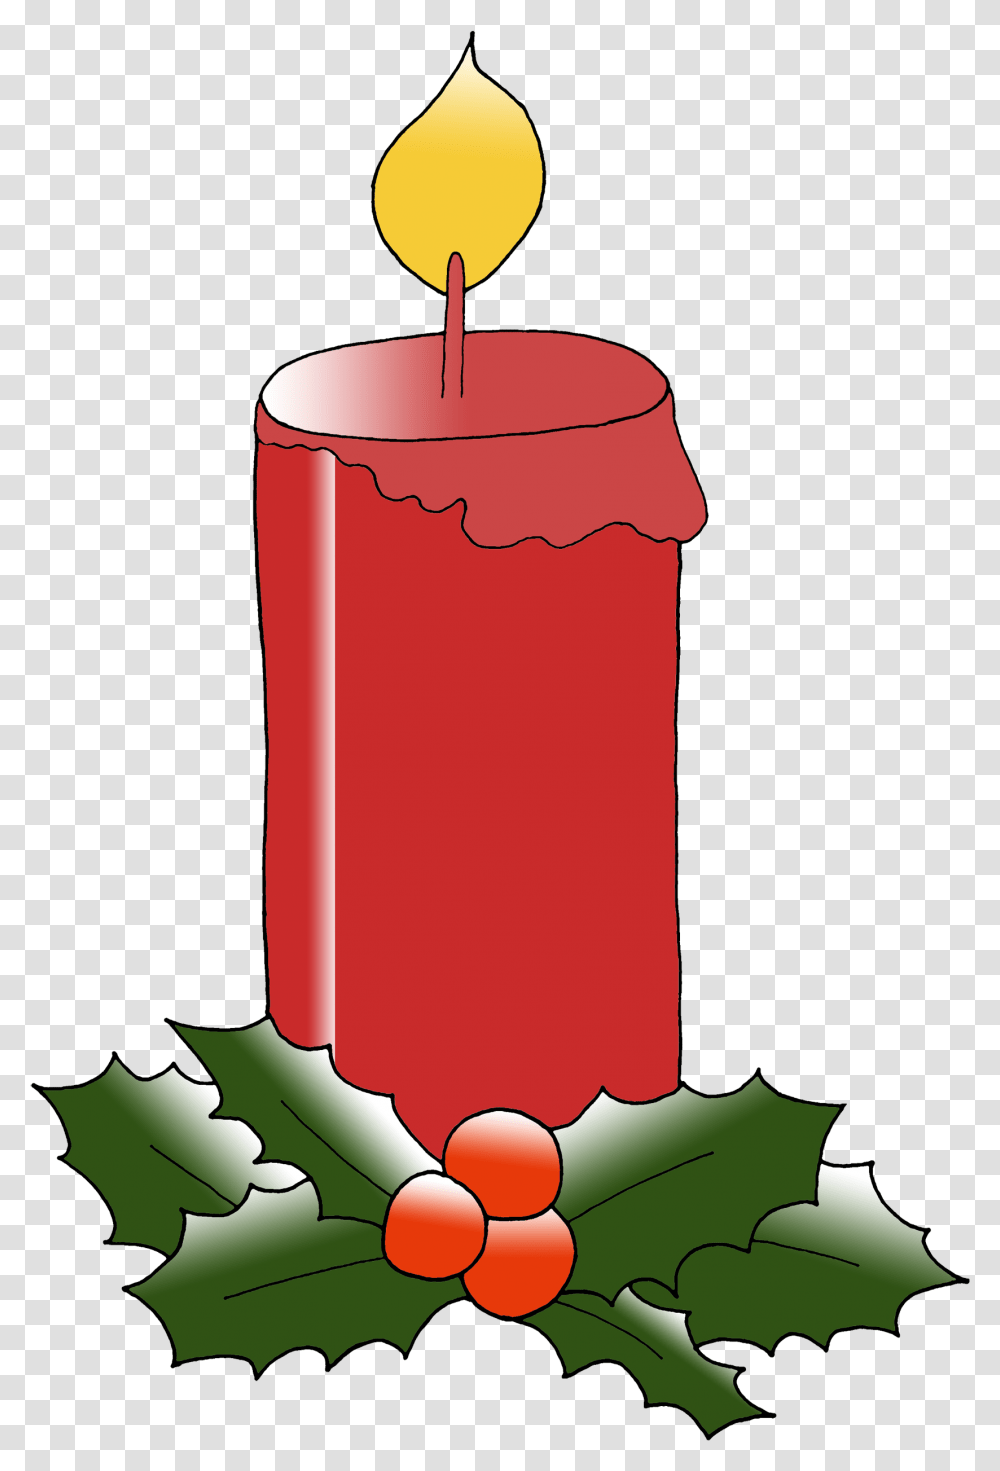 Free Christmas Candles Clipart Cartoons Christmas Candle Cartoon, Weapon, Weaponry, Bomb, Dynamite Transparent Png